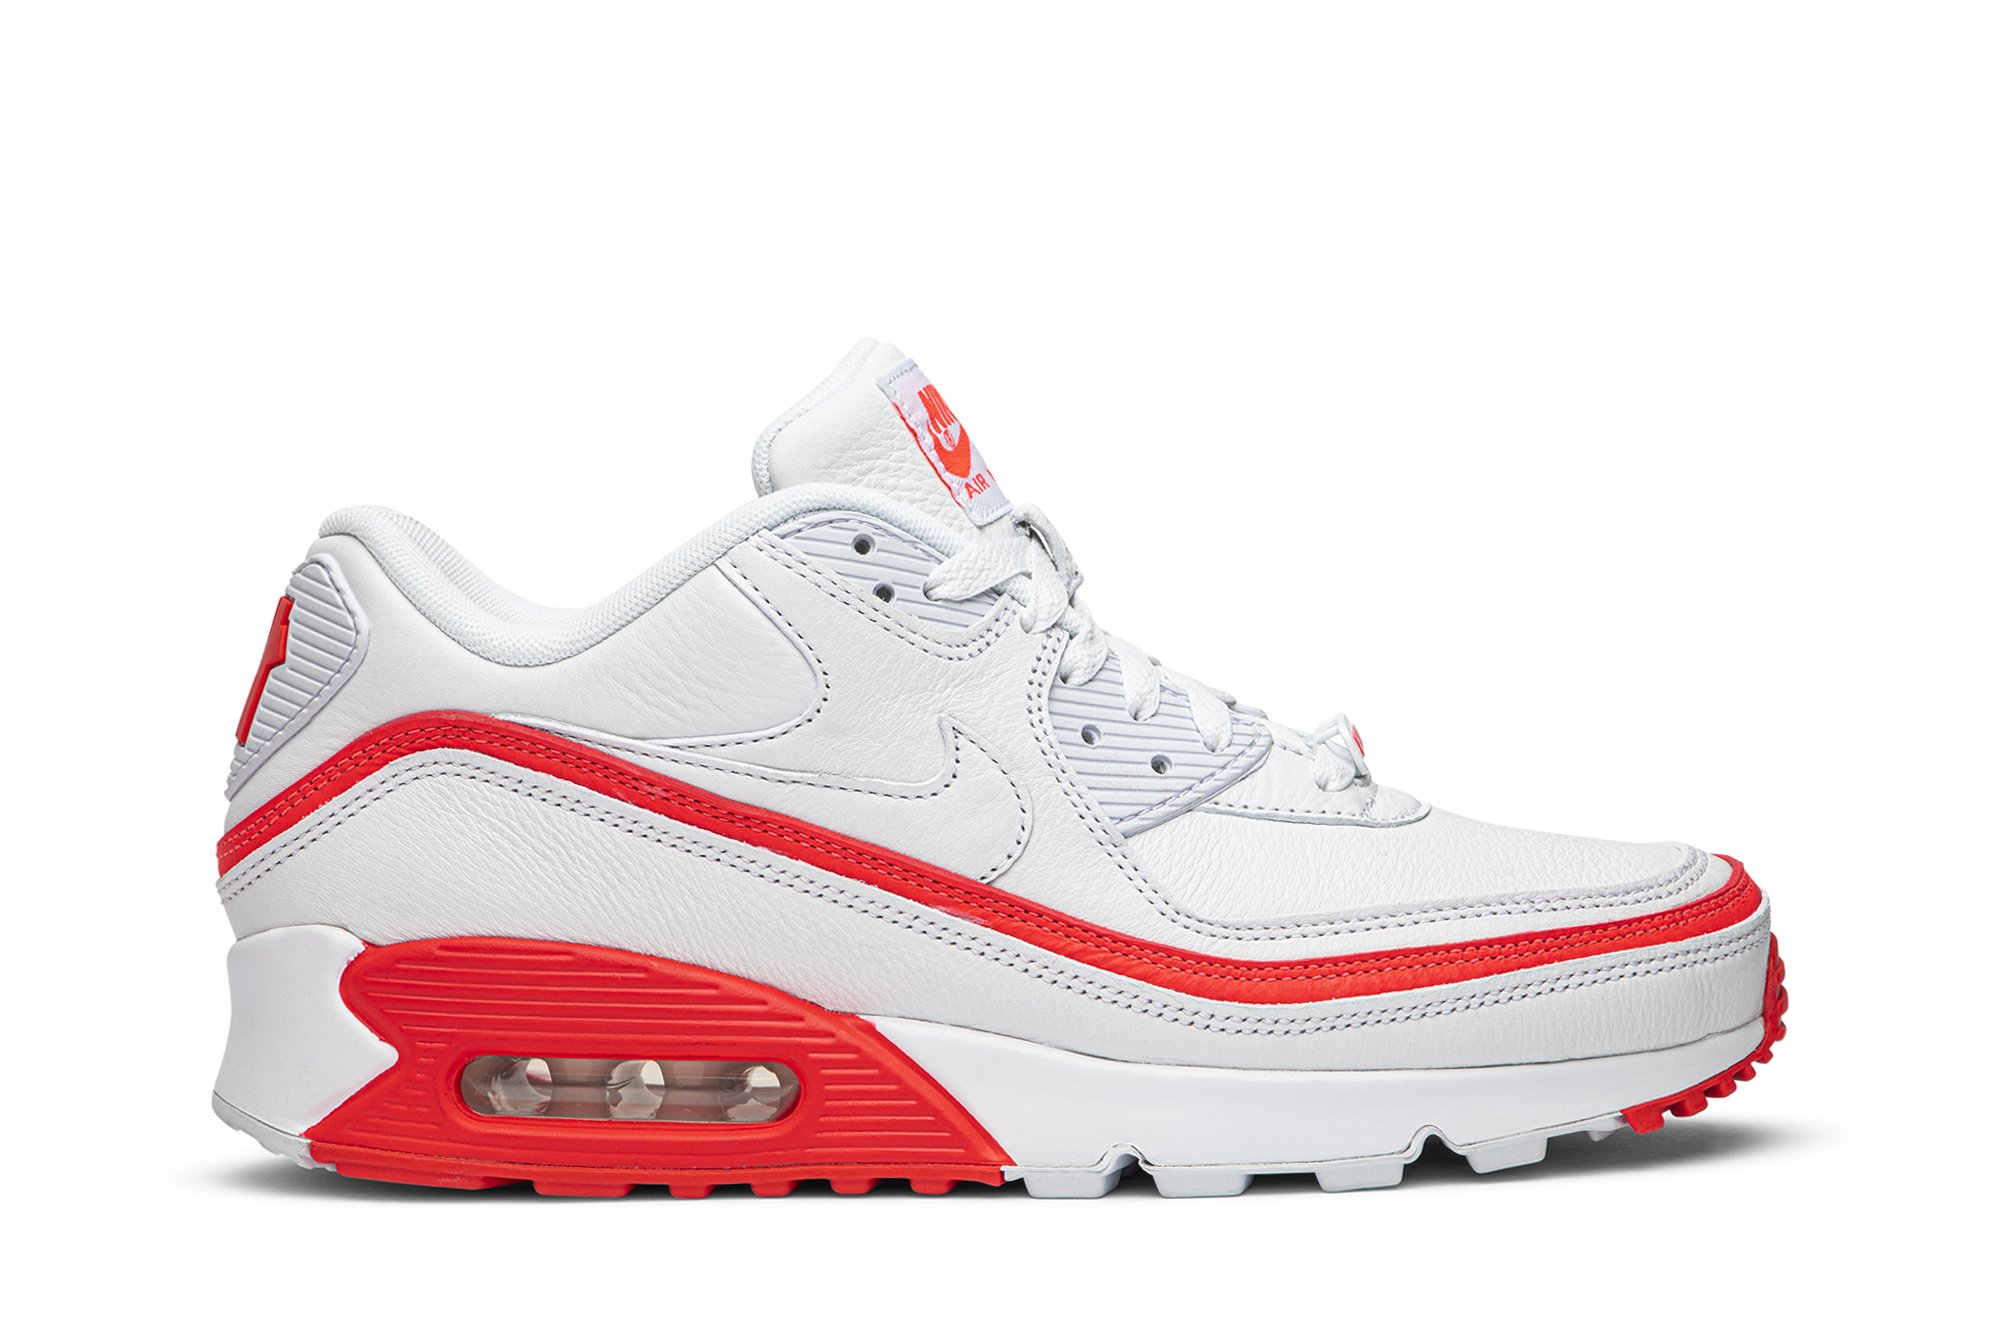 Undefeated x Air Max 90 'White Solar Red'